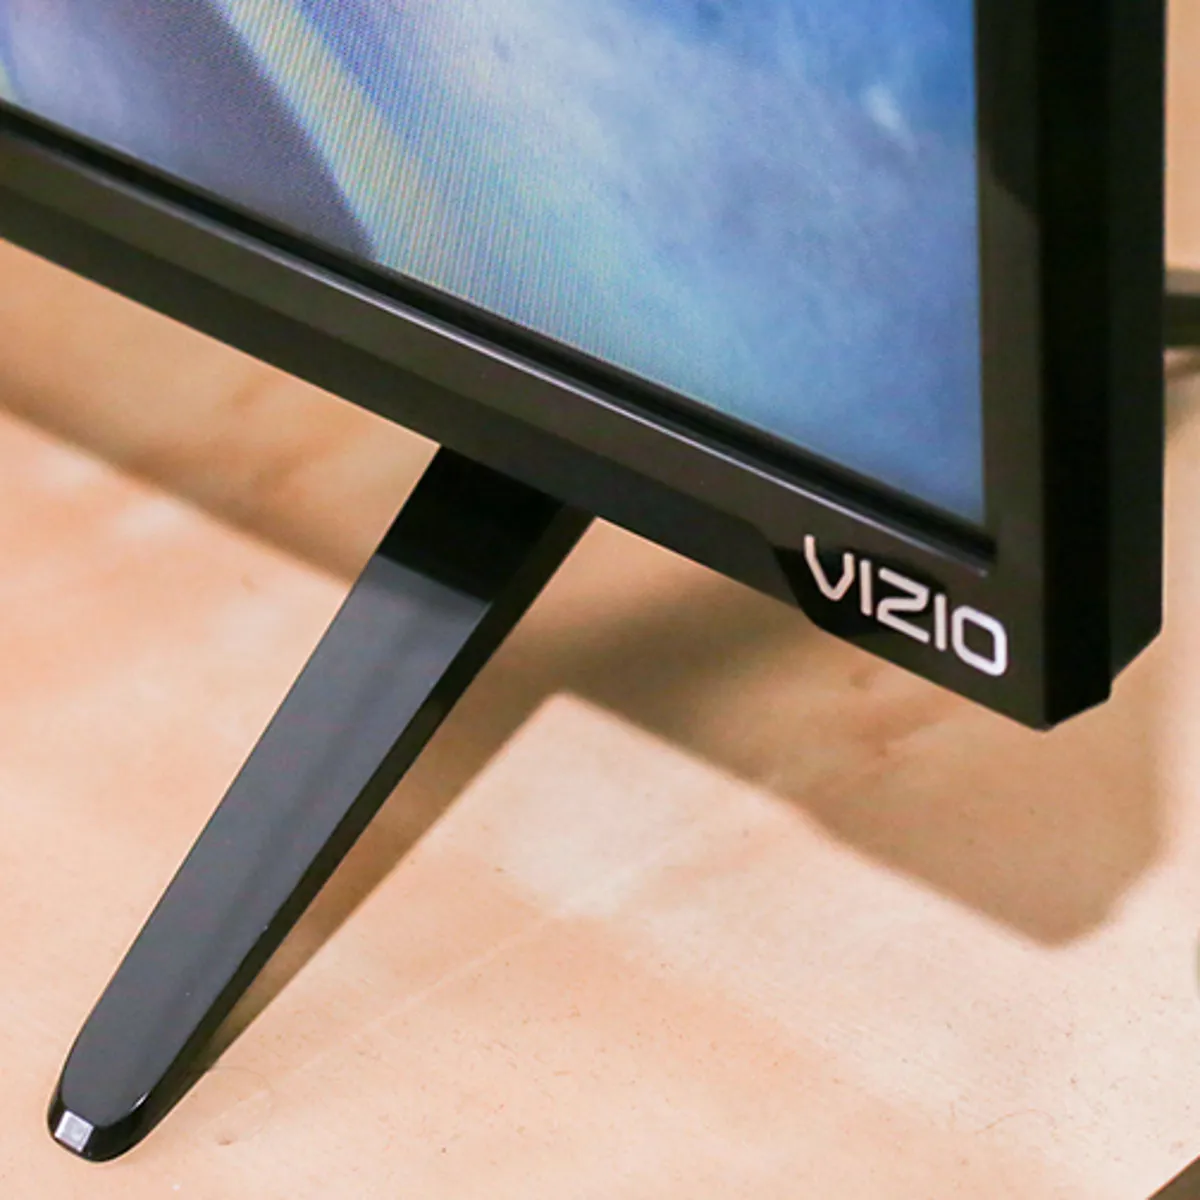 How Do I Know If My Vizio TV Is A Smart TV?